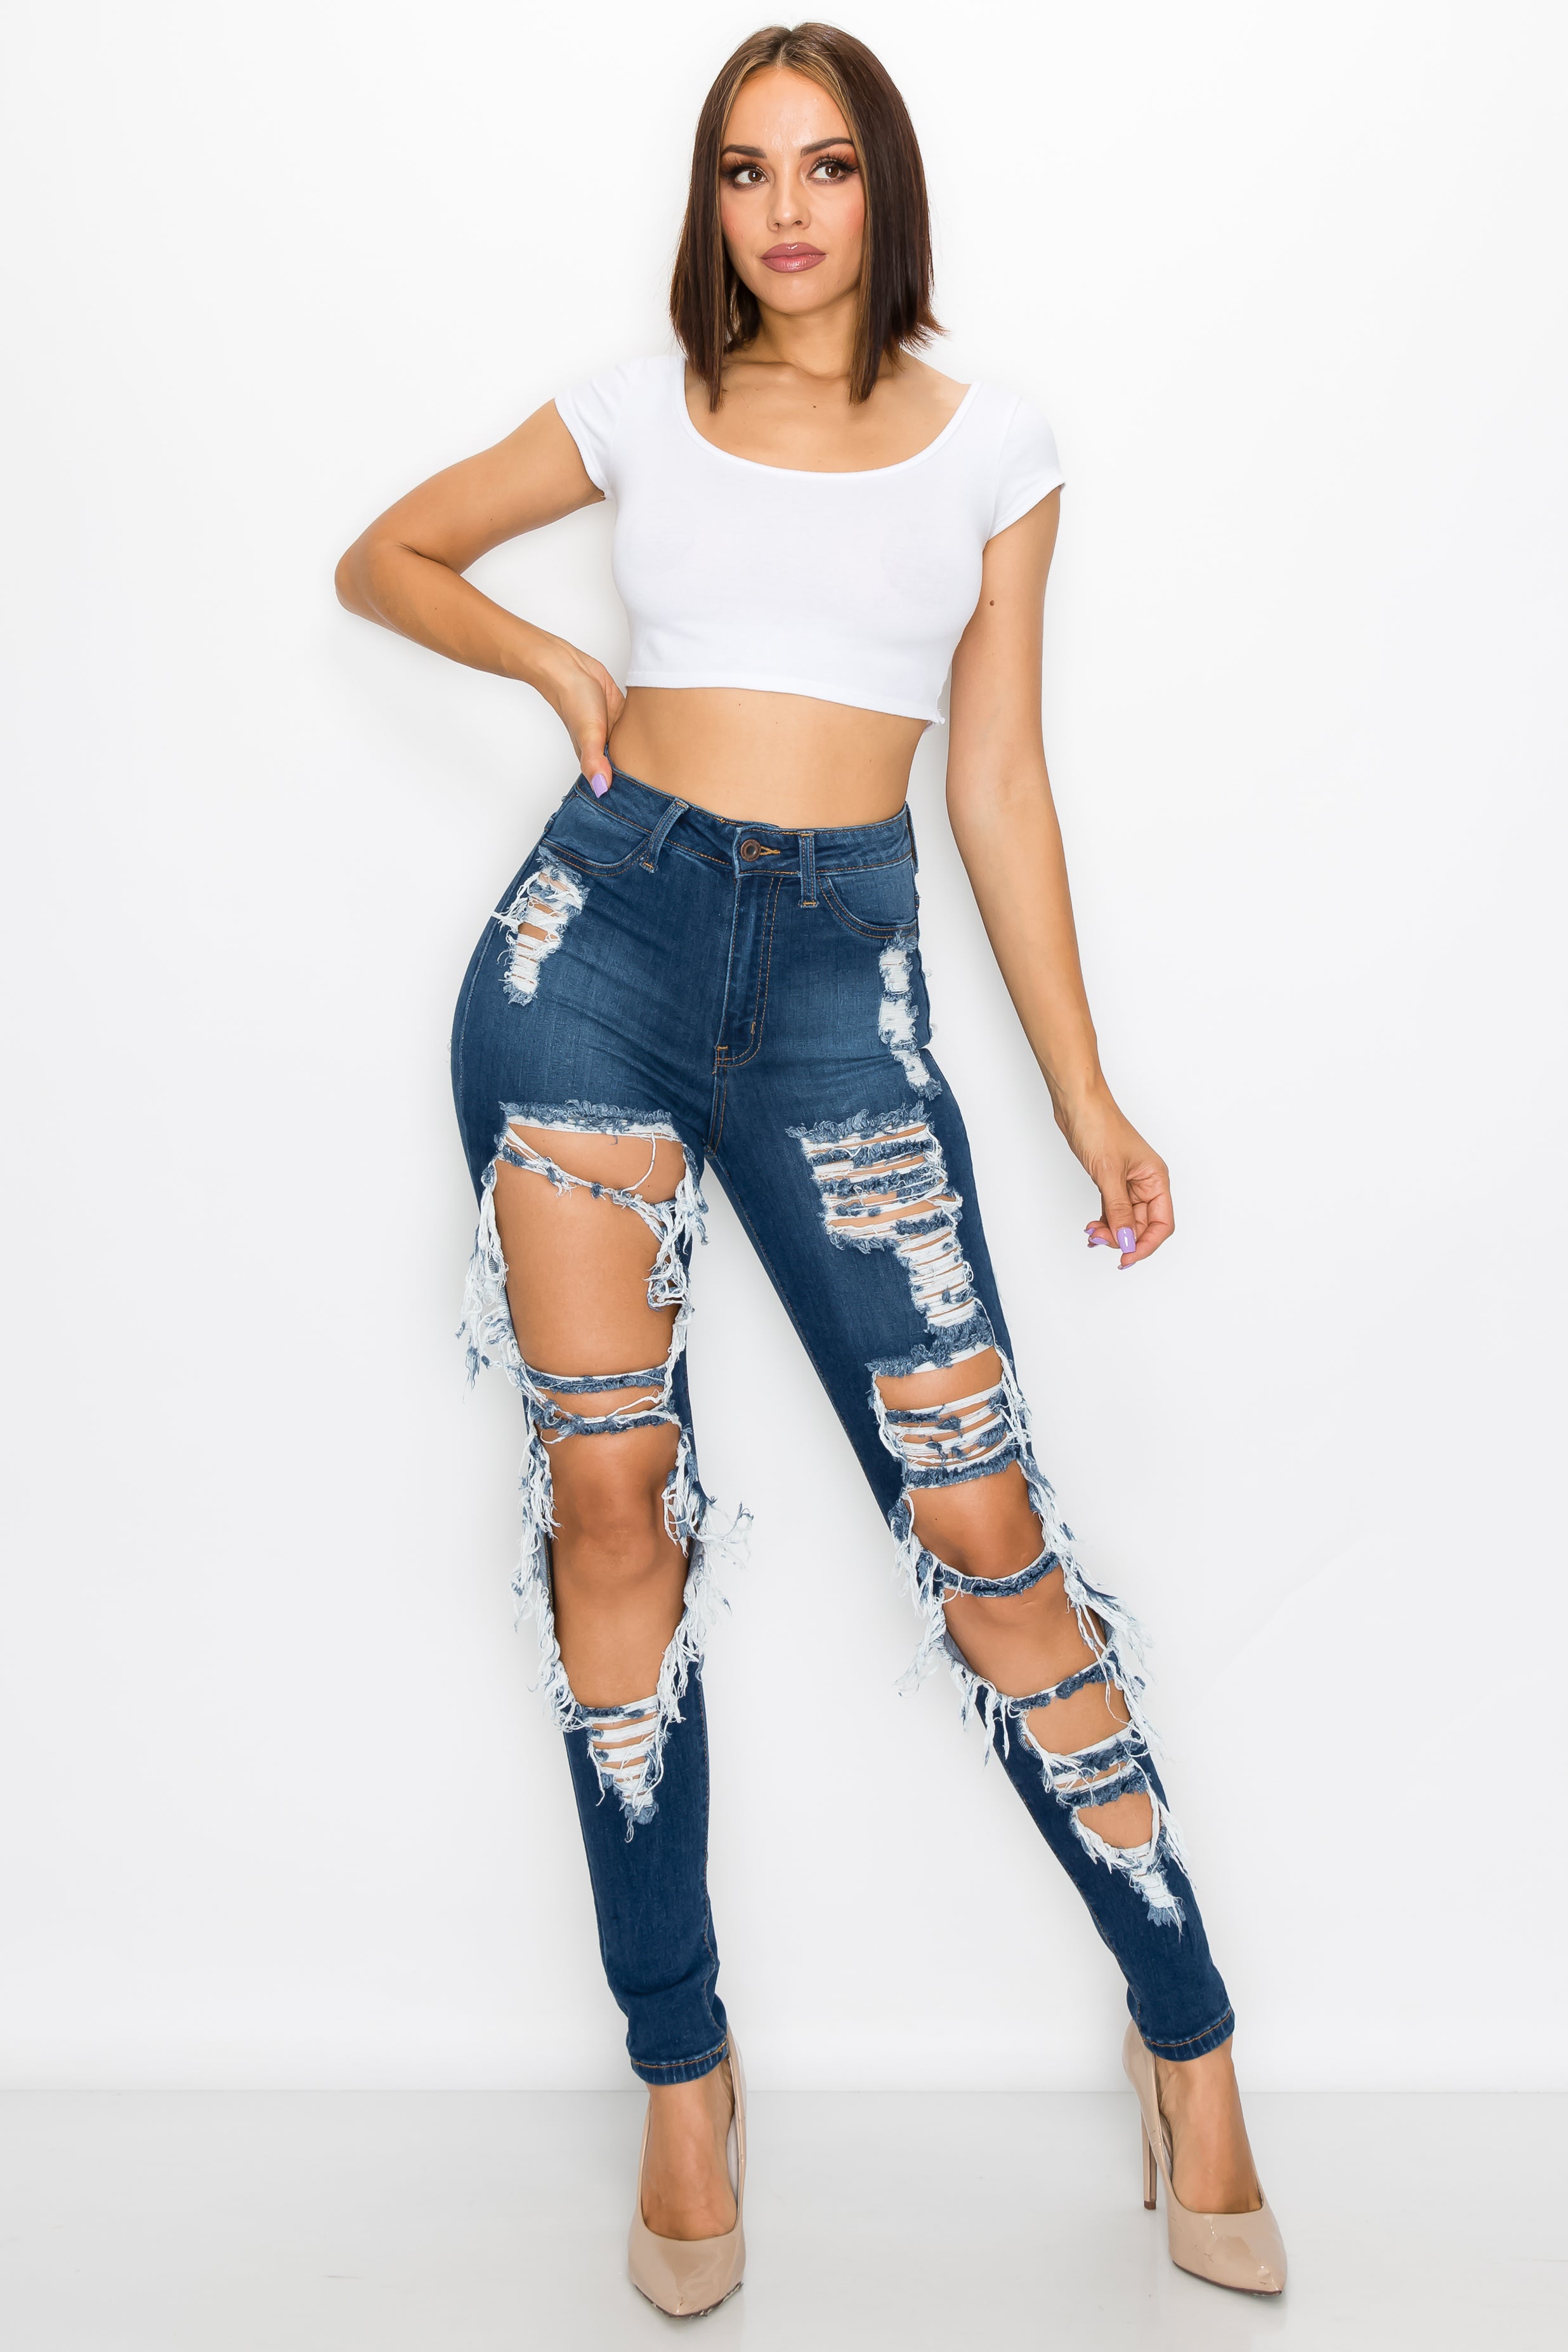 lijden innovatie Nationale volkstelling Super High Waisted Distressed Skinny Jeans with Cut Outs – Aphrodite Jeans